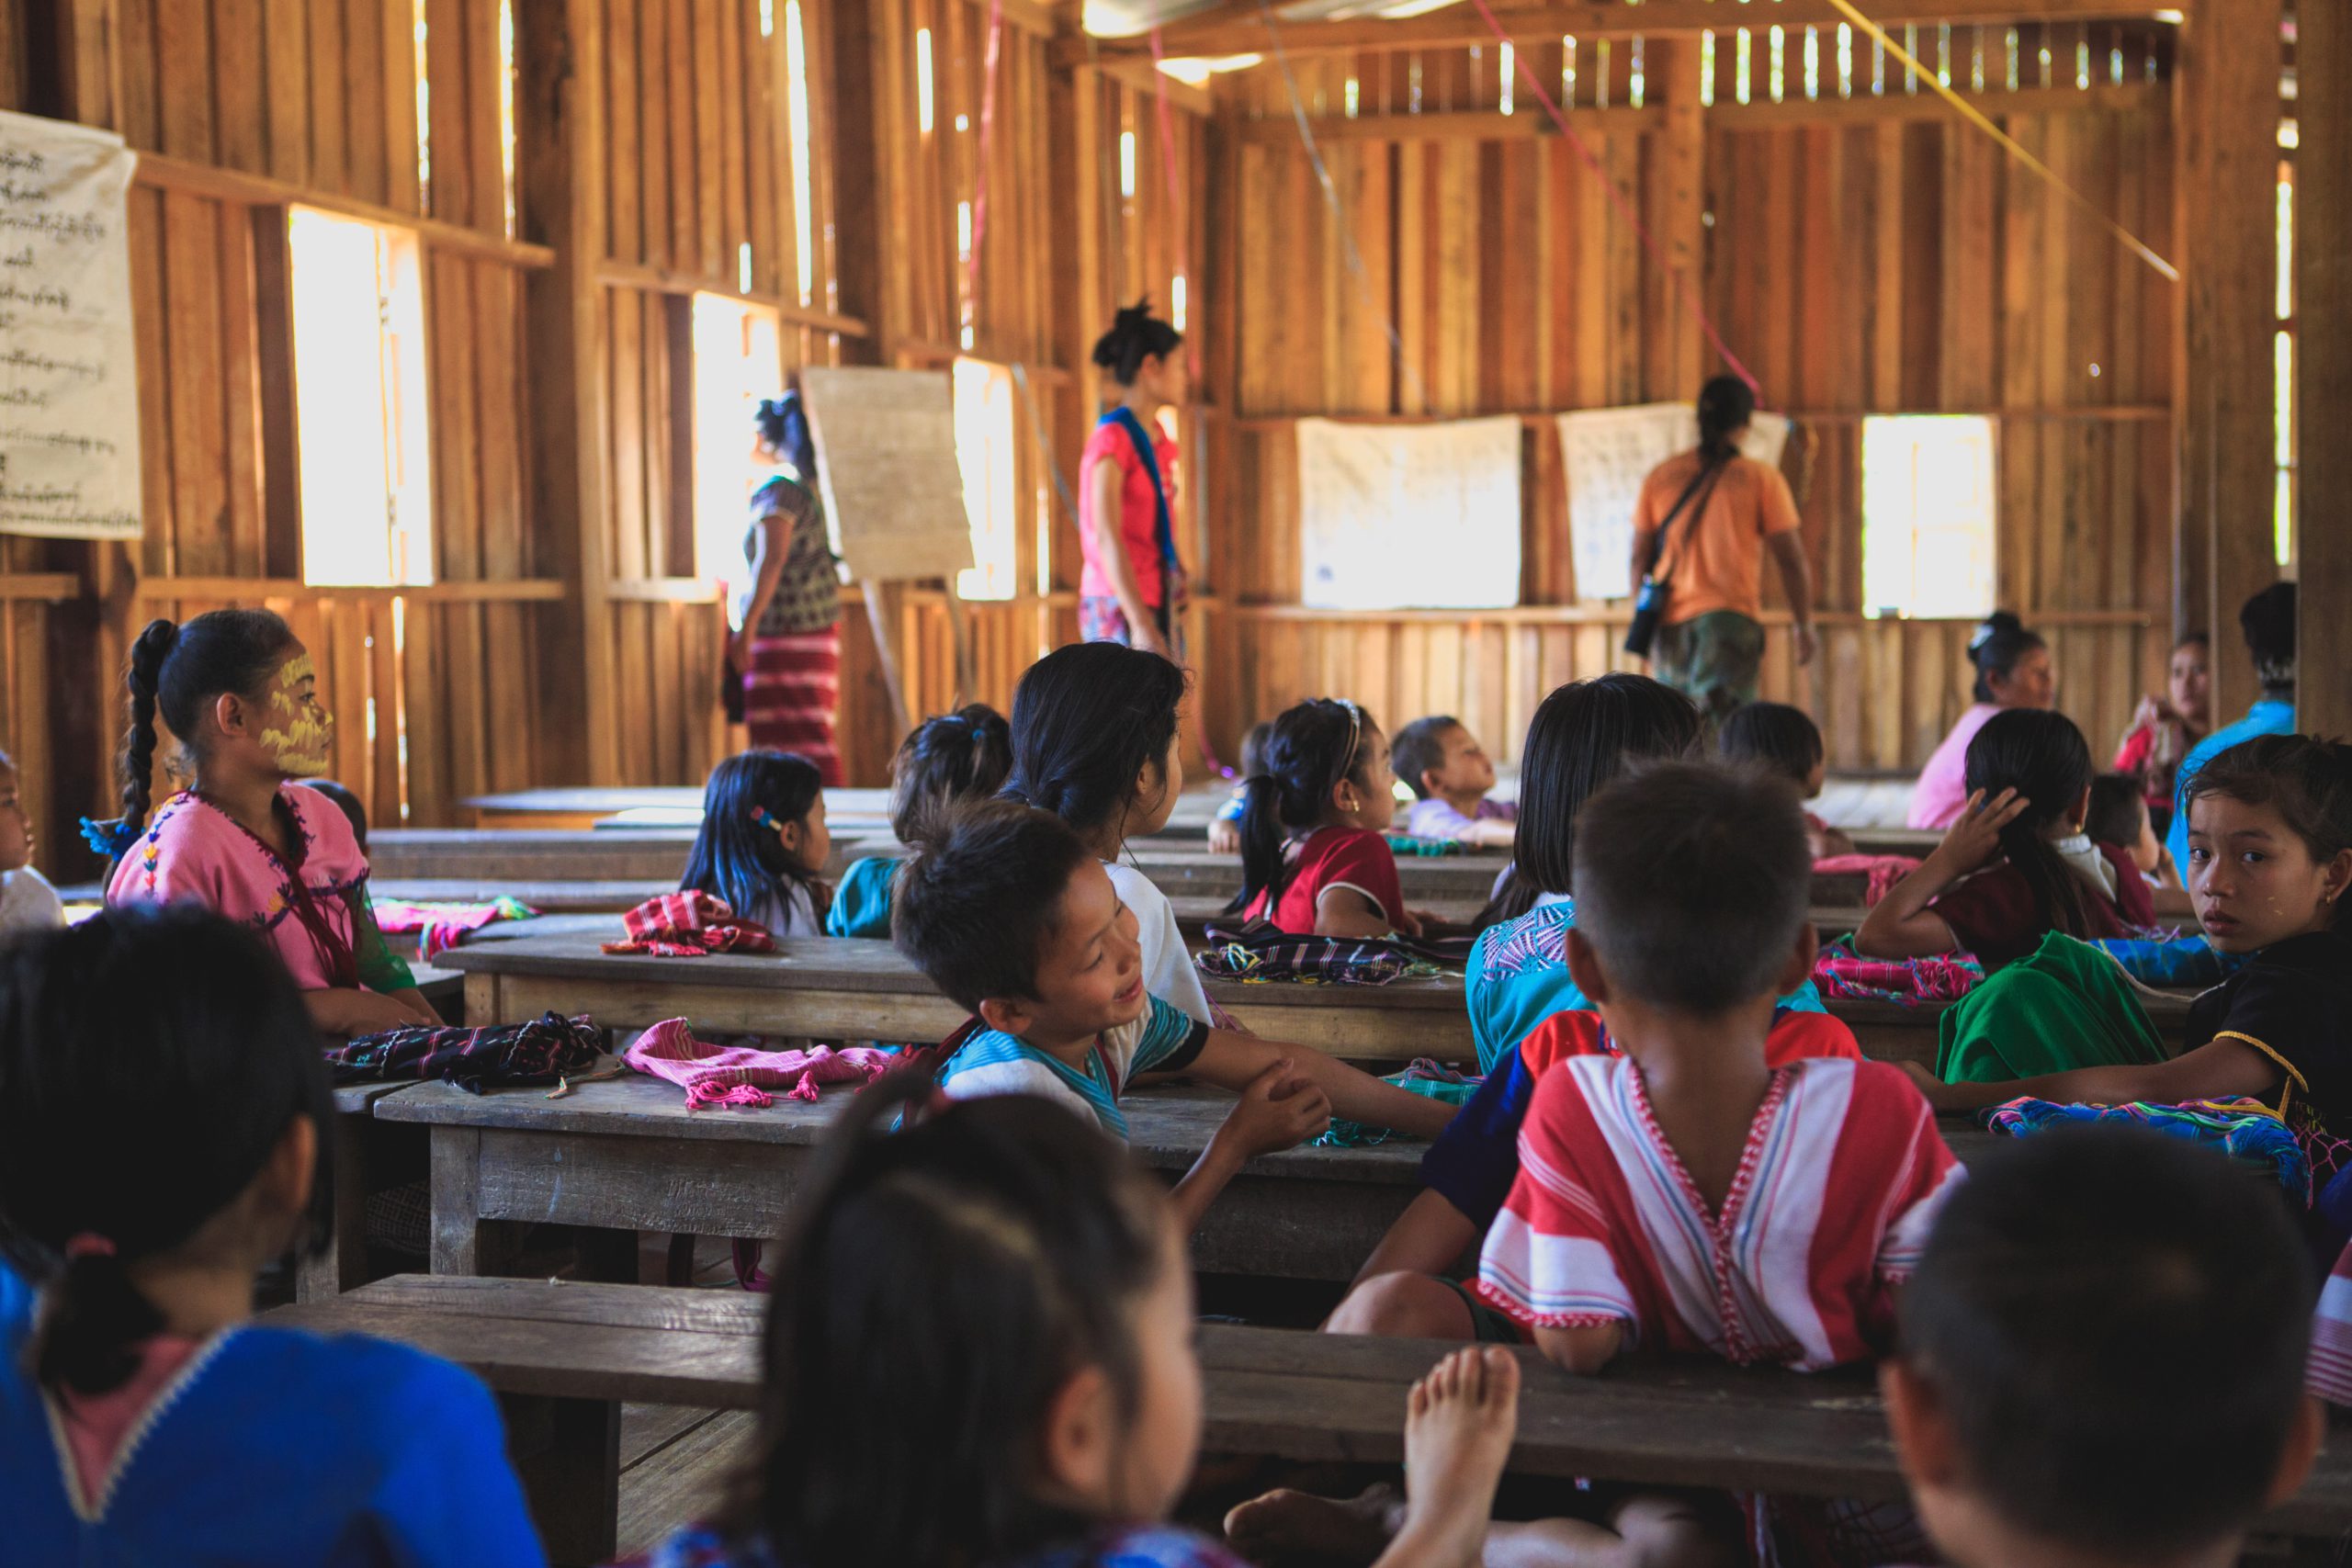 As teachers and students boycott classes in Myanmar, can online learning fill the gap?